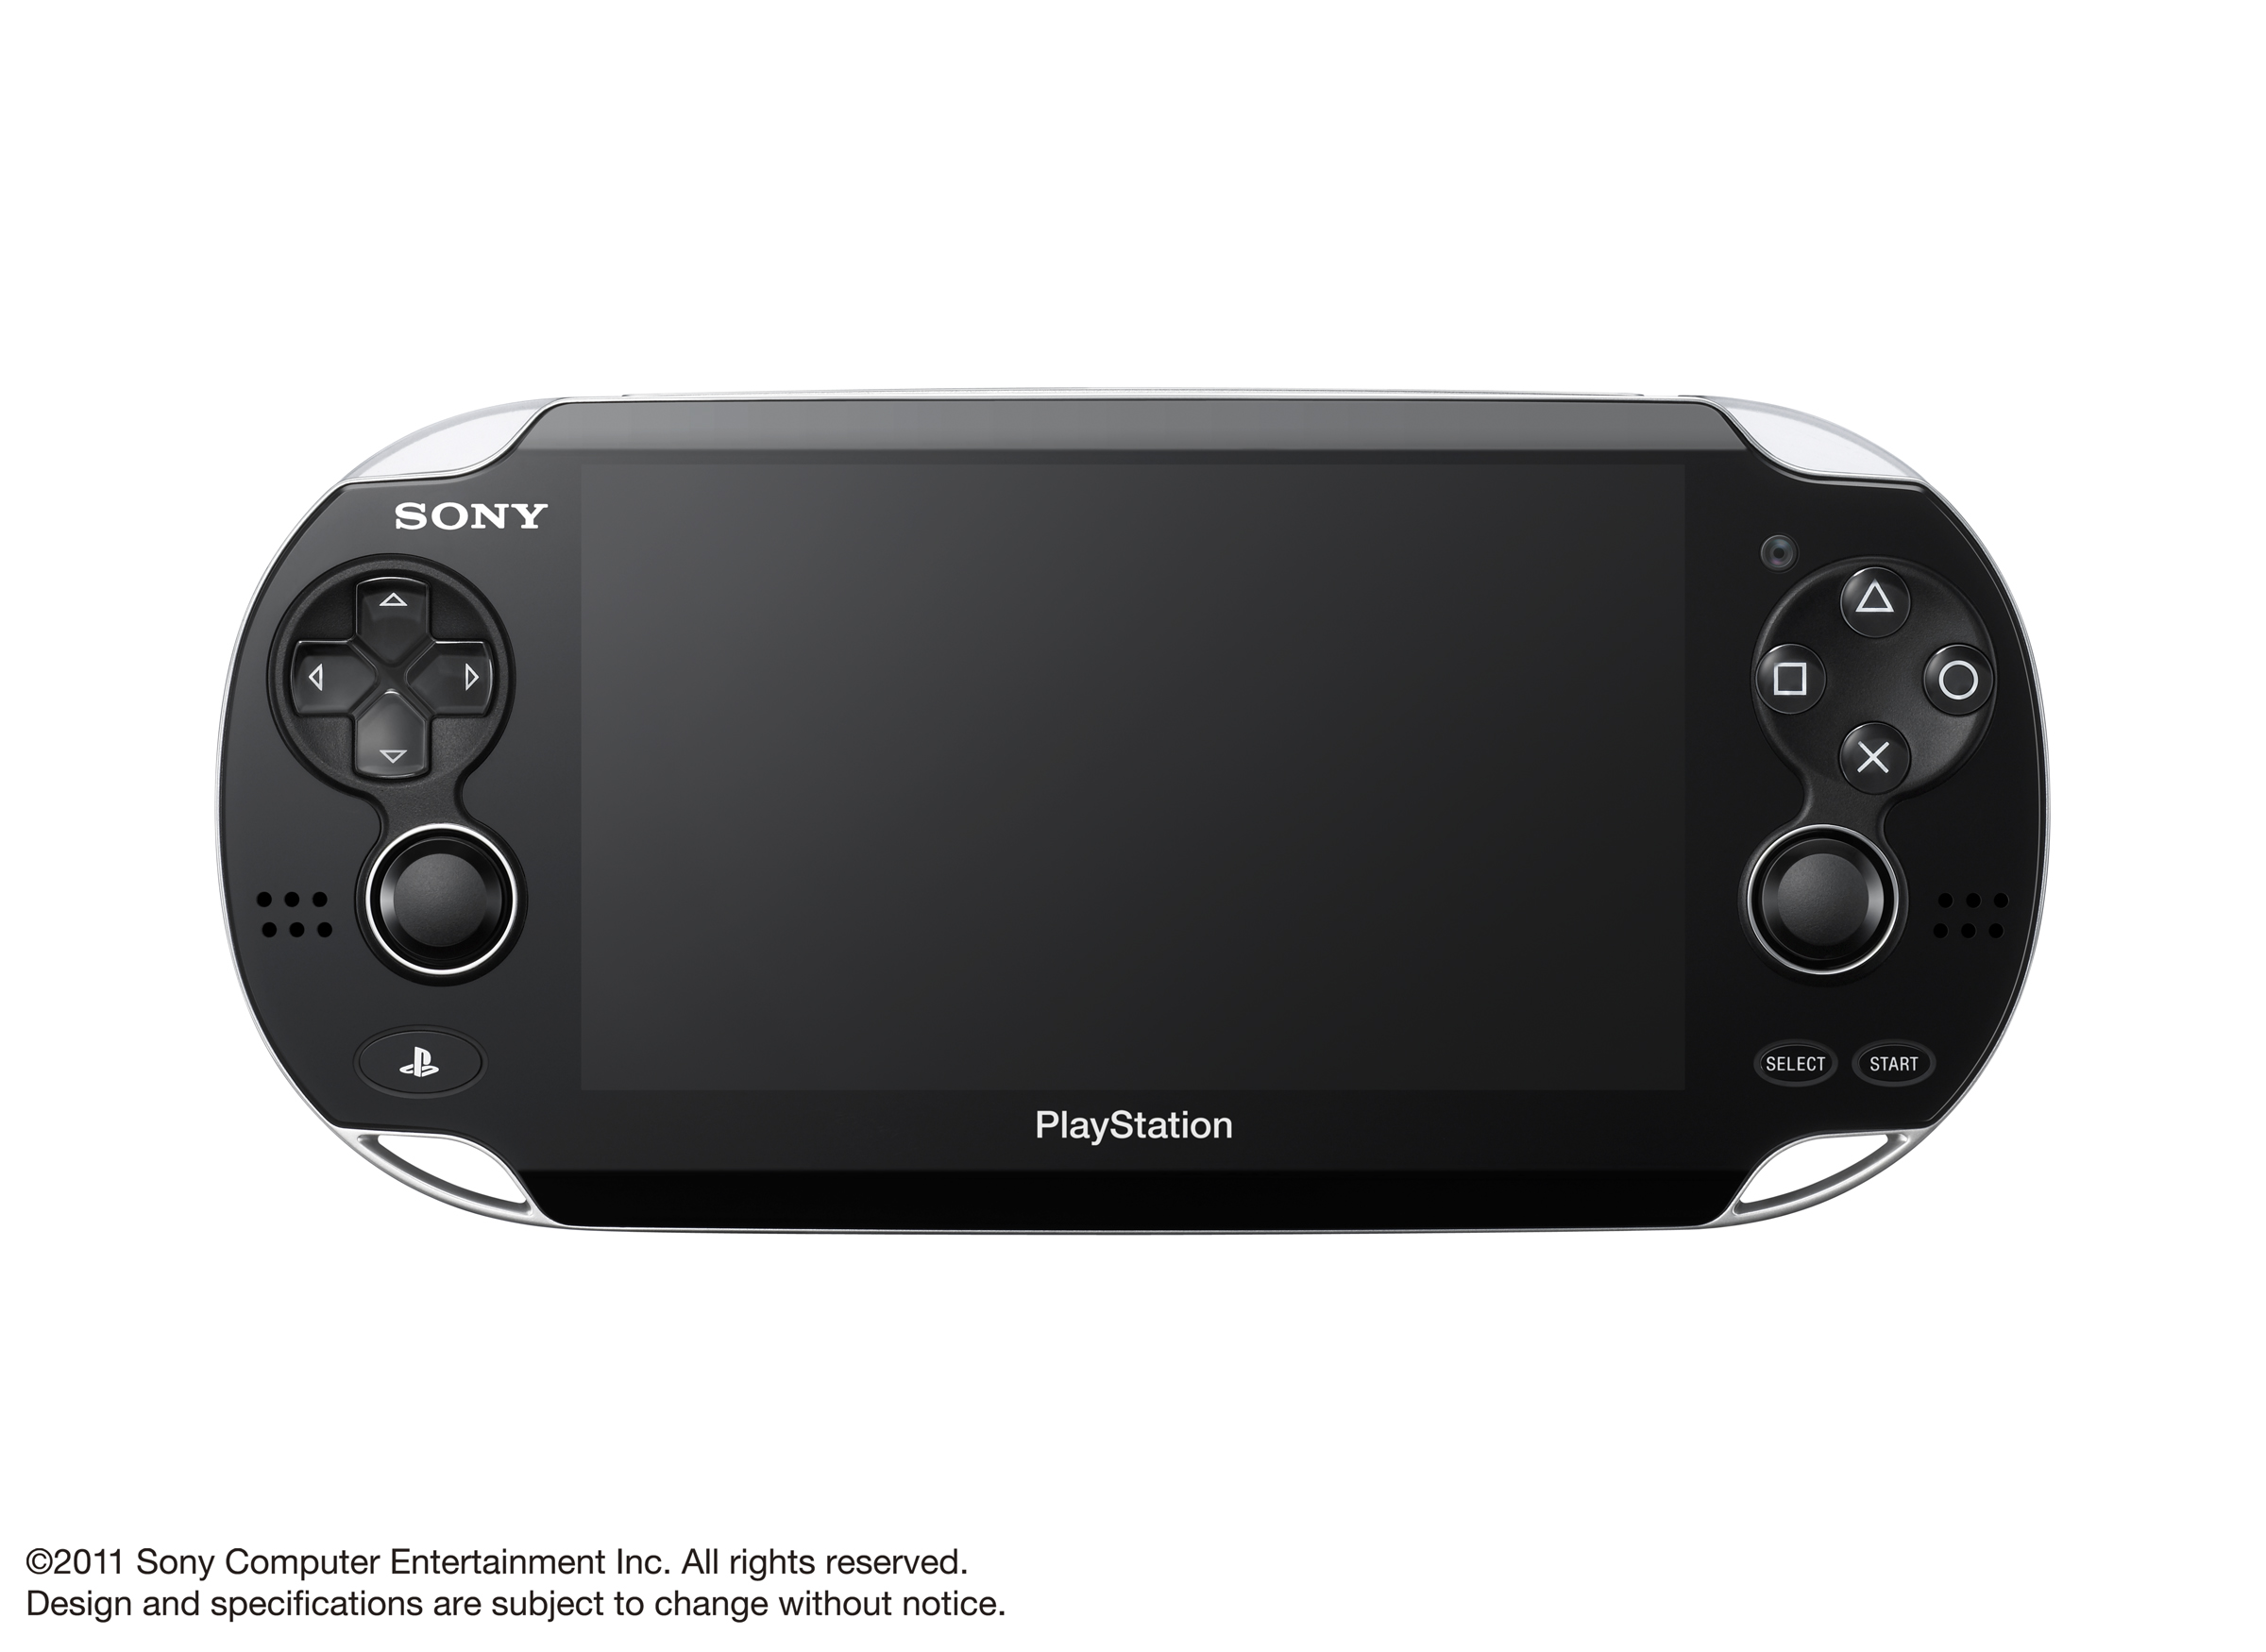 Kojima- PSP2 IS as powerful as PS3, will announce new game ...
